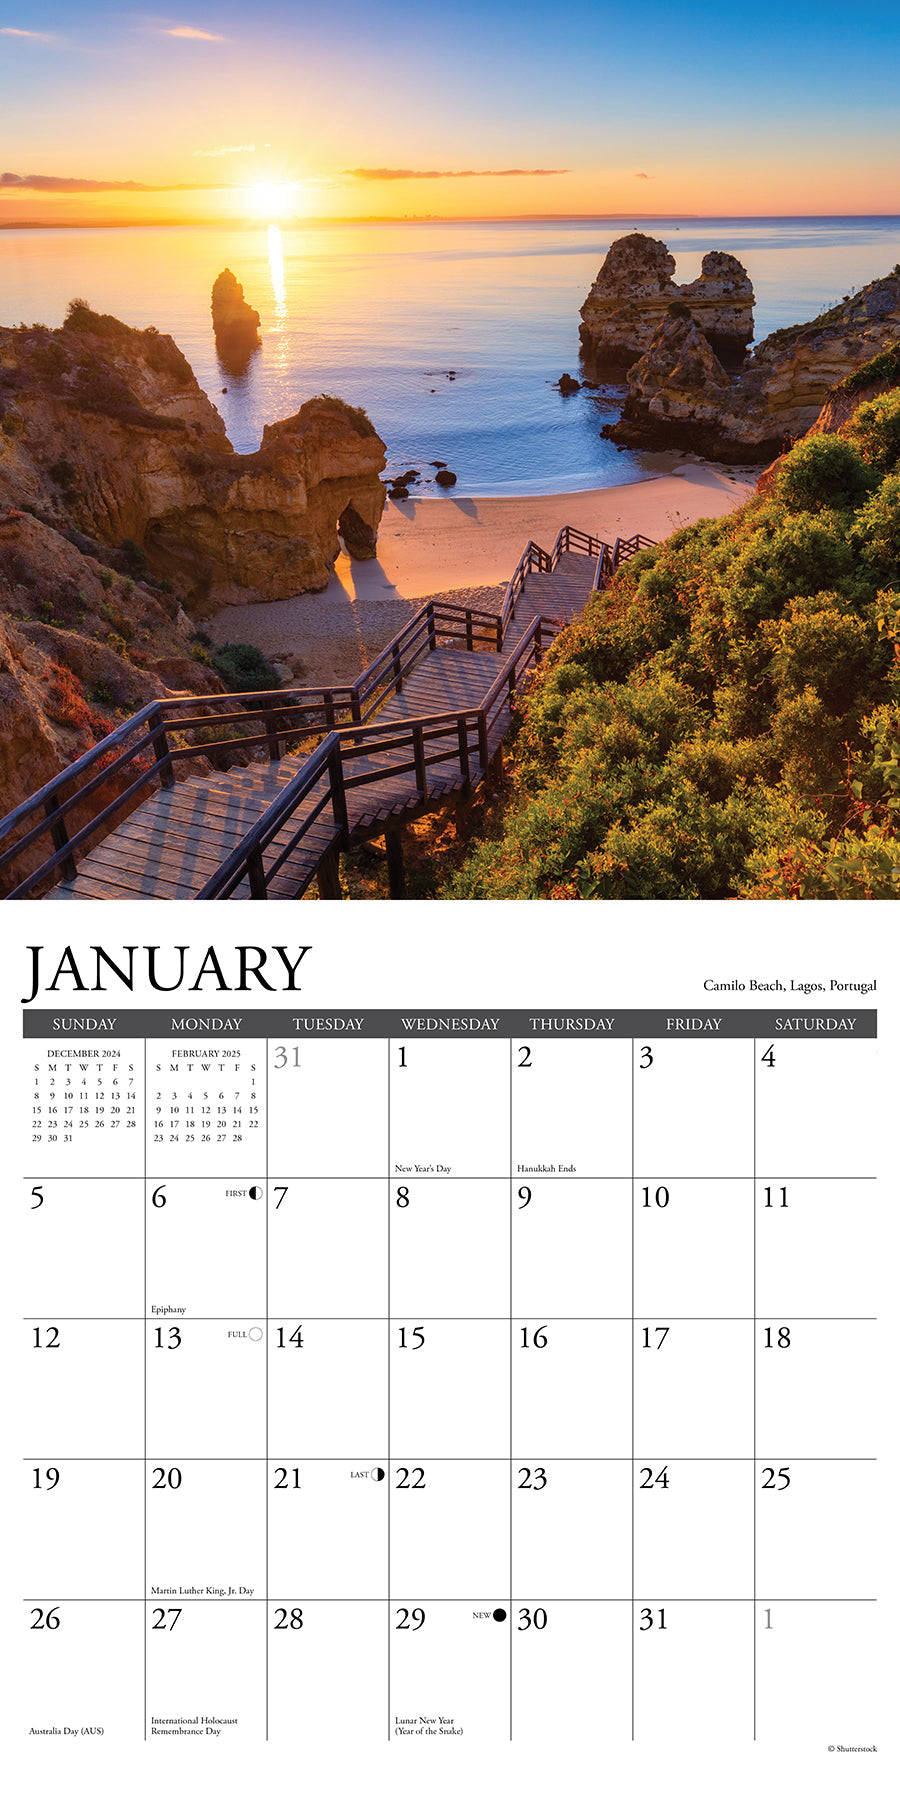 2025 Sunrise, Sunset - Square Wall Calendar (US Only)